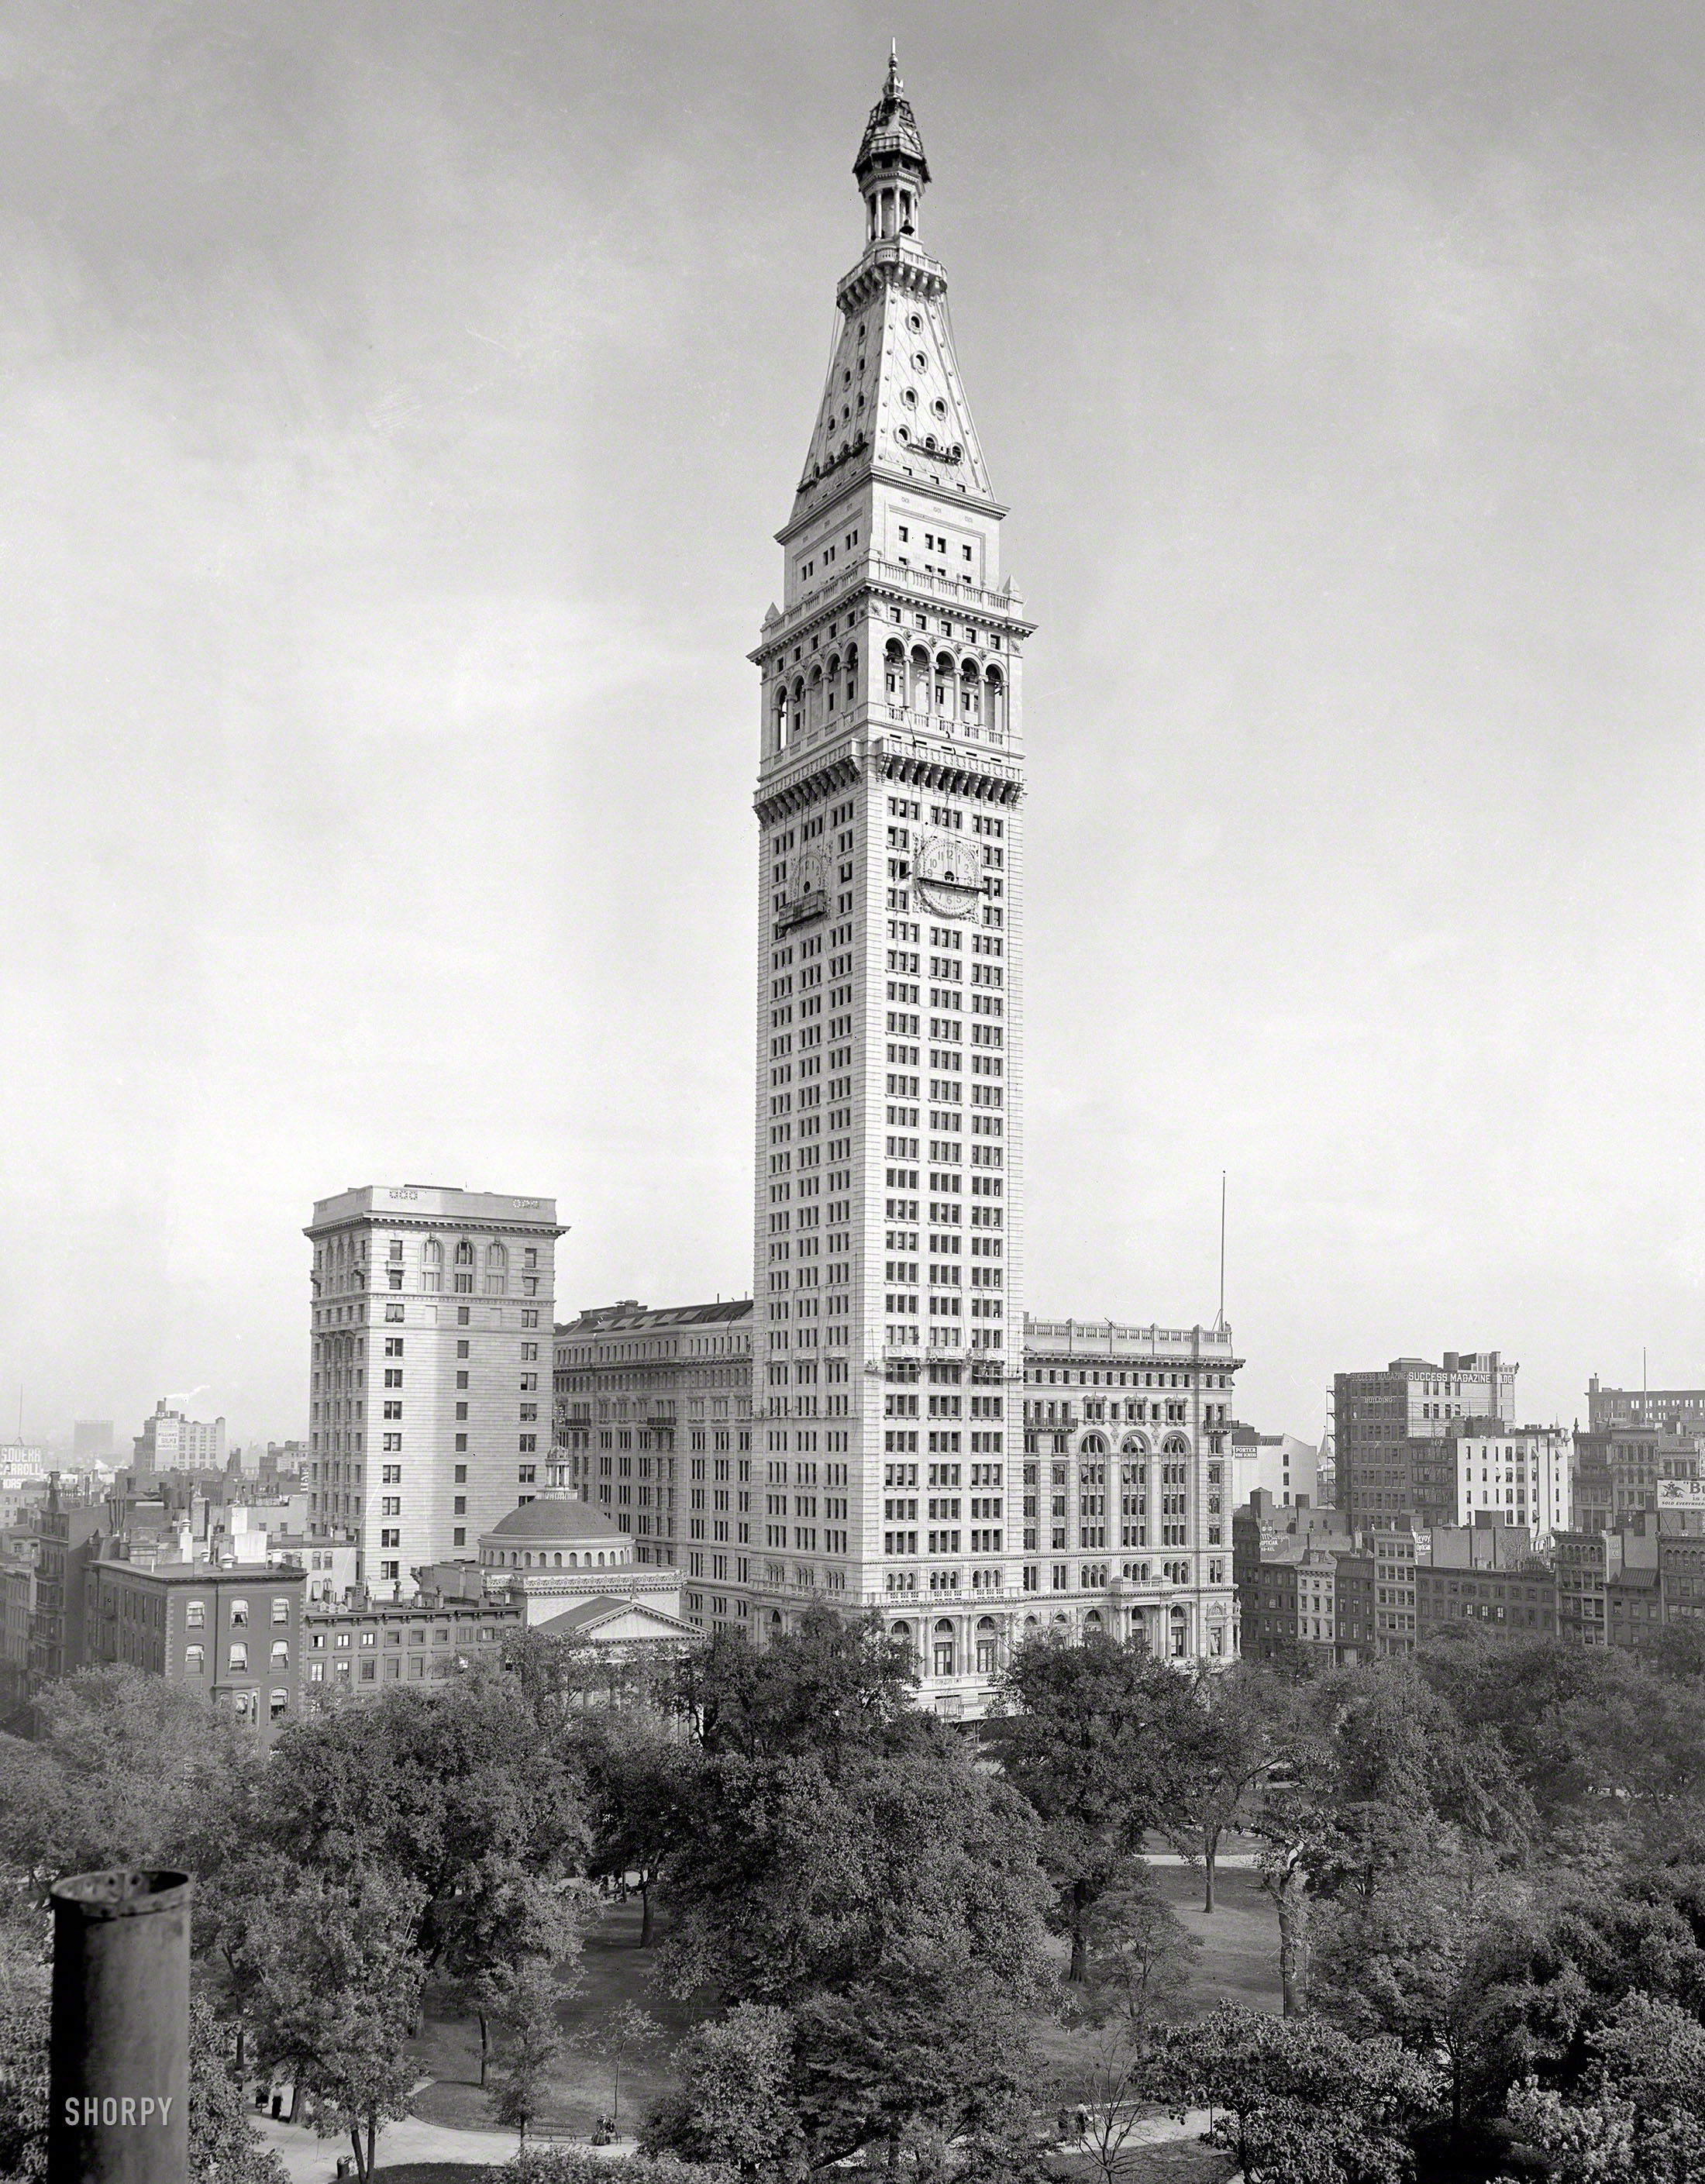 New York in 1909. "Metropolitan Life Insurance Building and Madison Square." The Met Life tower in the final stages of construction, with various scaffolds and platforms attached. 8x10 glass negative, Detroit Publishing Co. View full size.